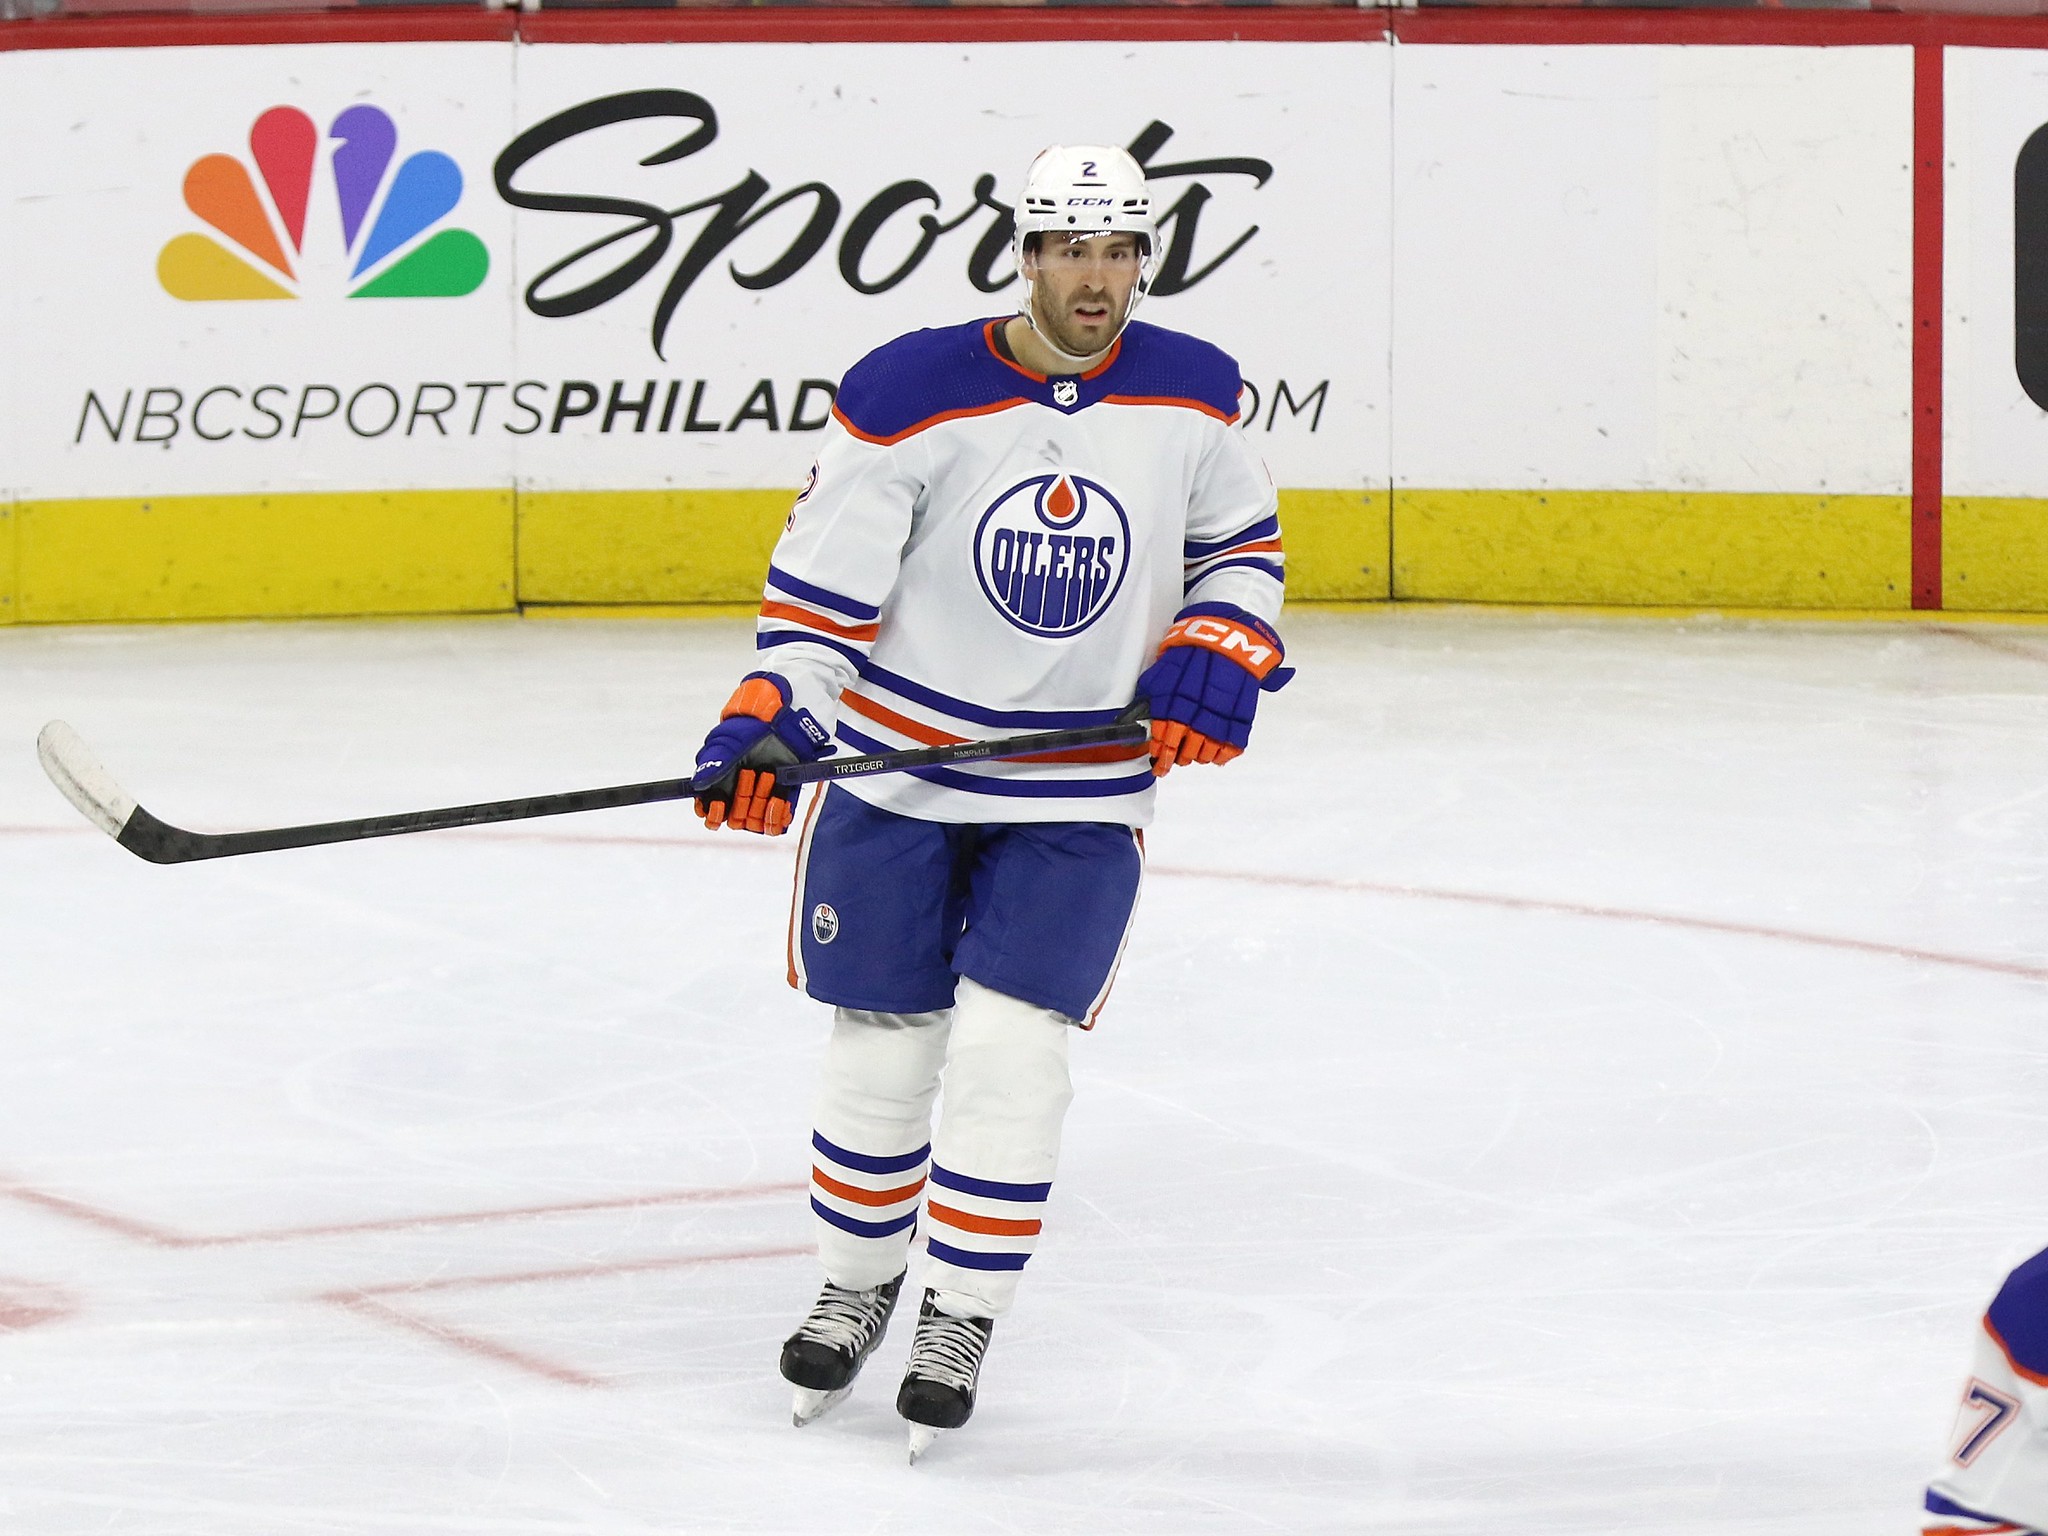 Evan Bouchard Game Preview: Oilers vs. Jets